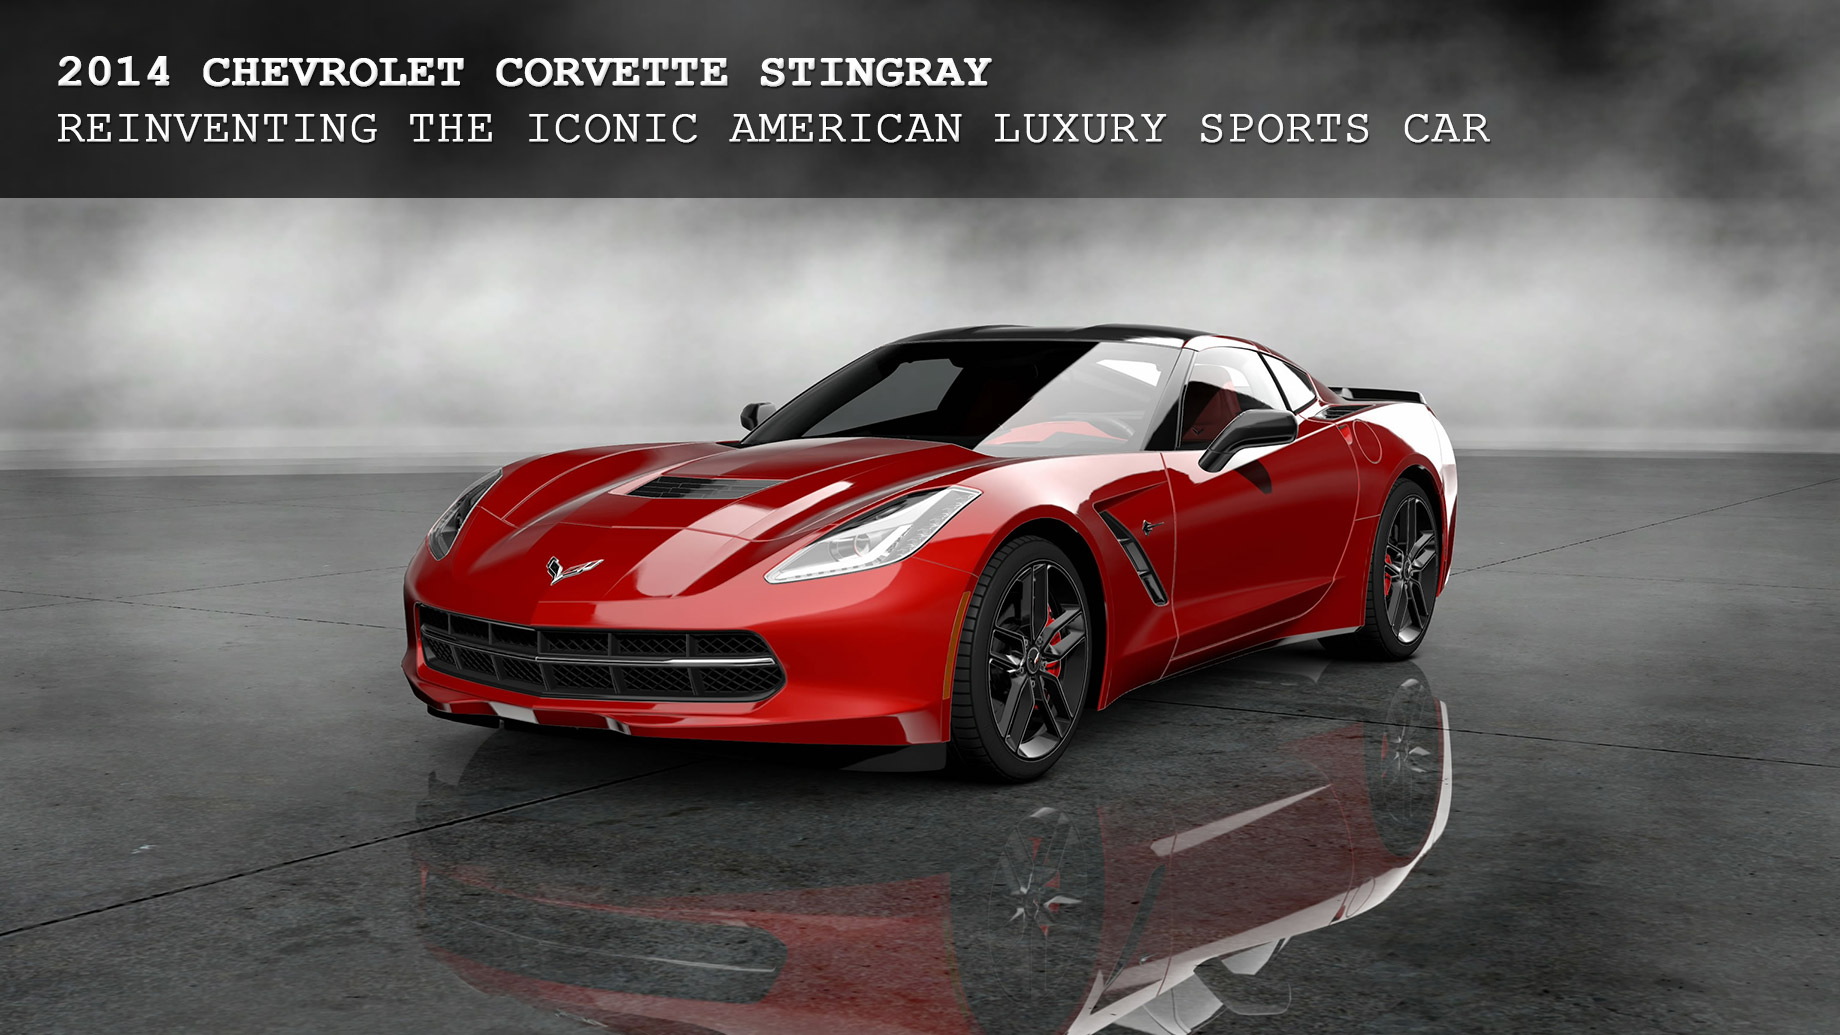 001a-2014-Chevrolet-Corvette-Stingray-Reinventing-the-Iconic-American-Luxury-Sports-Car